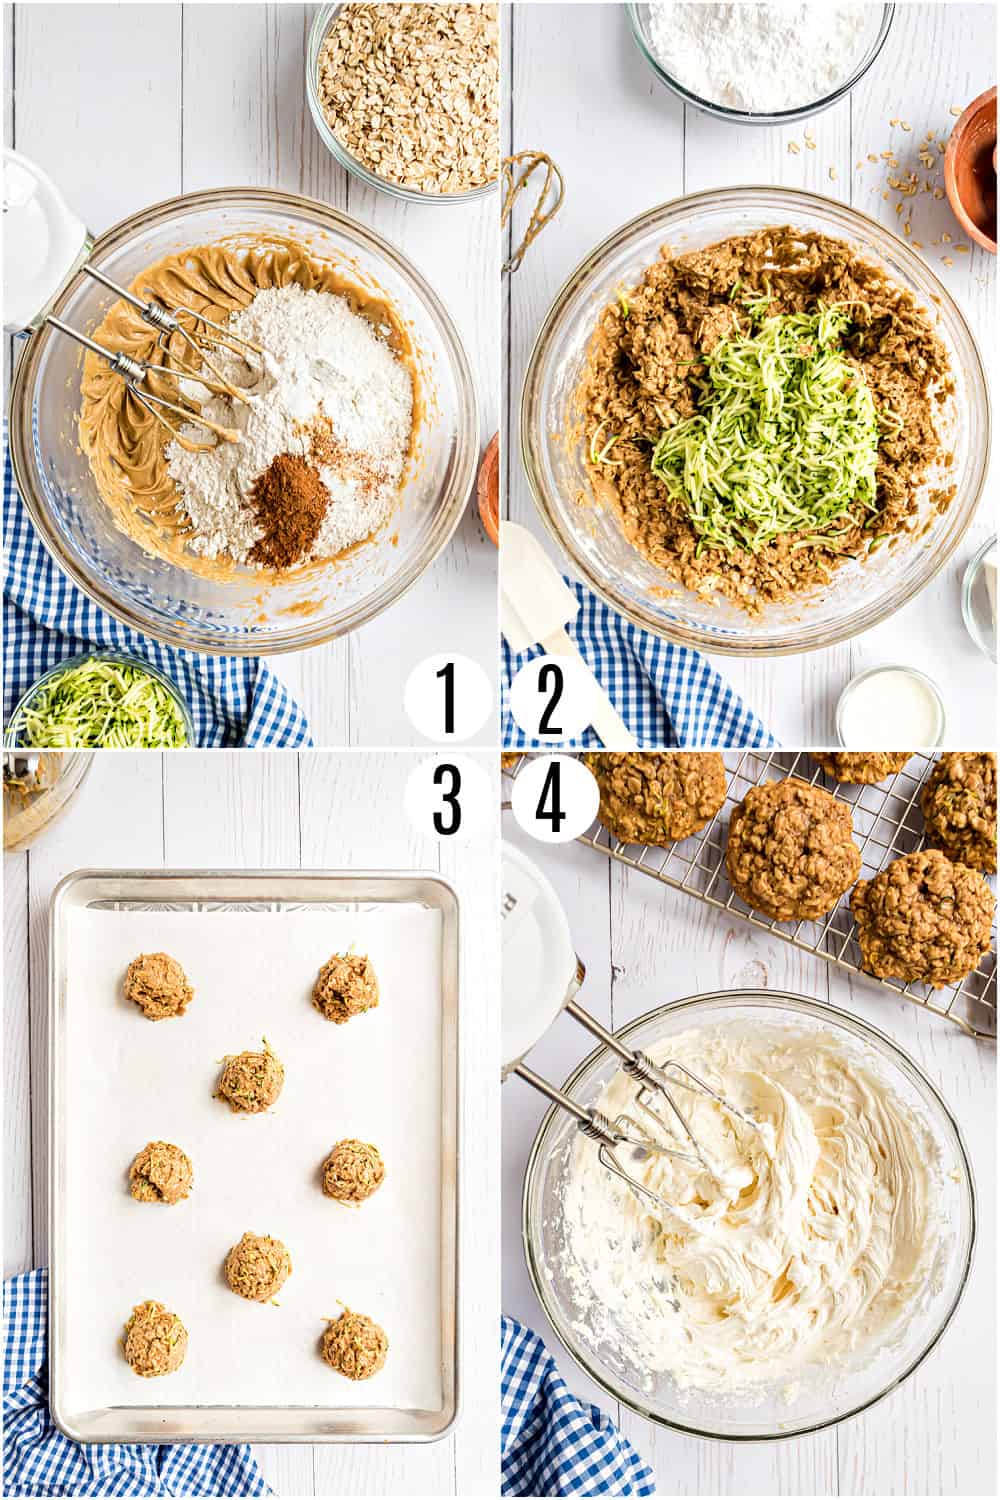 Step by step photos showing how to make zucchini cookies.